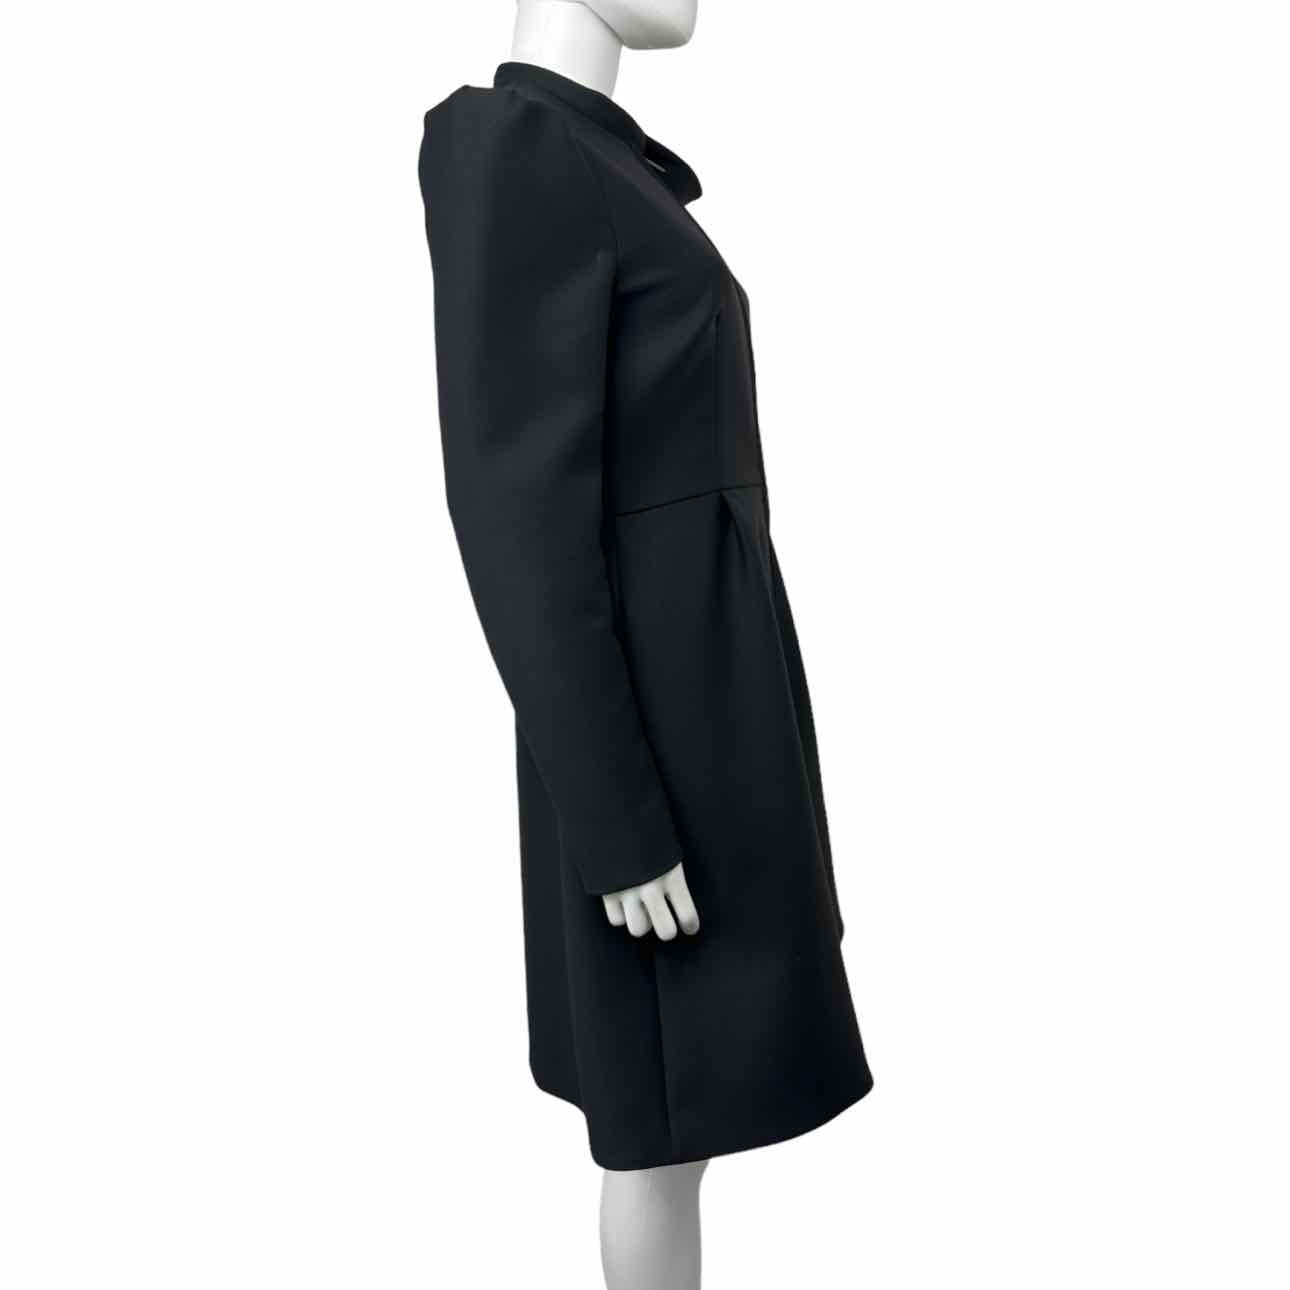 VALENTINO TECHNOCOUTURE Black 2 Piece Dress and Jacket, vintage inspired luxury dress and jacket